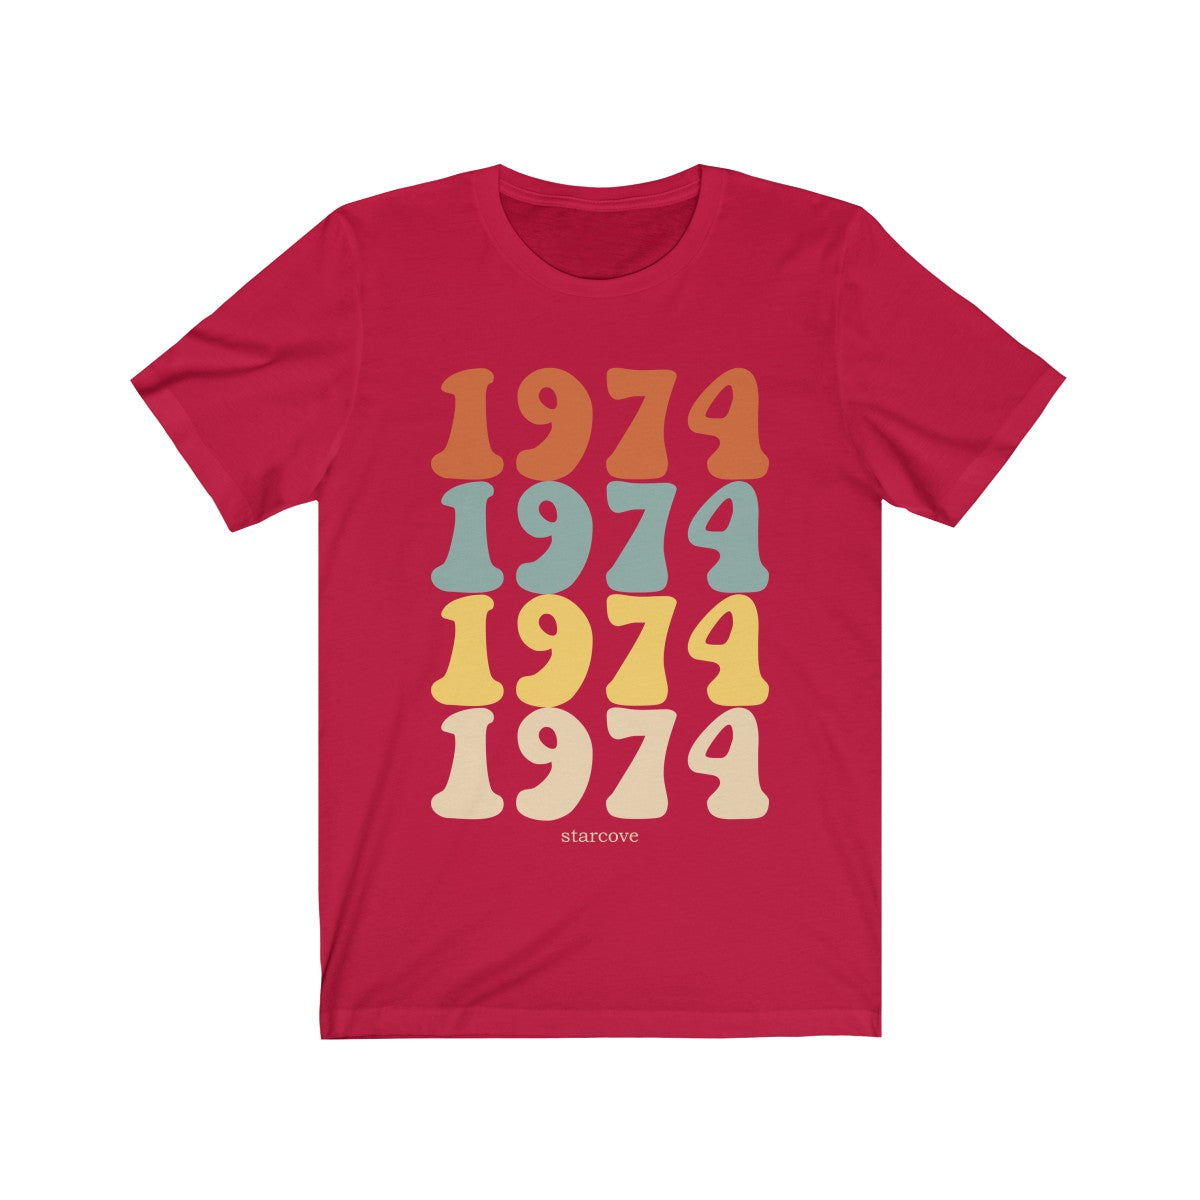 1974 shirt, 47th Birthday Party Turning 47 Years Old, 70s Retro Vintage gift Idea Women Men, Born Made in 1974 Funny Present Dad Mom TShirt Starcove Fashion